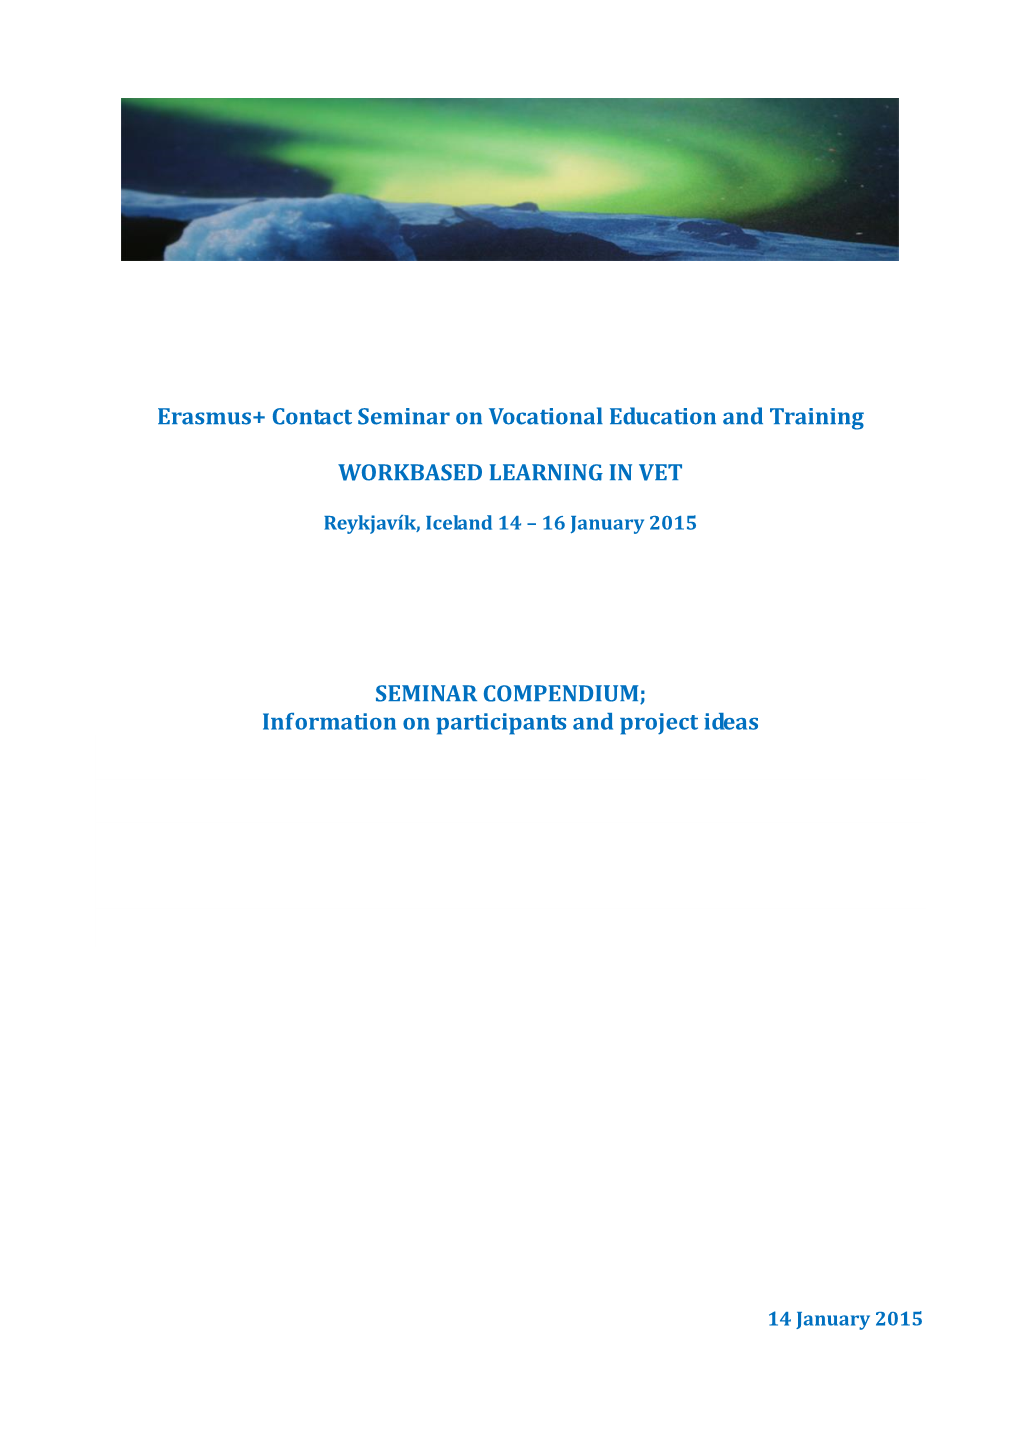 Erasmus+ Contact Seminar on Vocational Education and Training